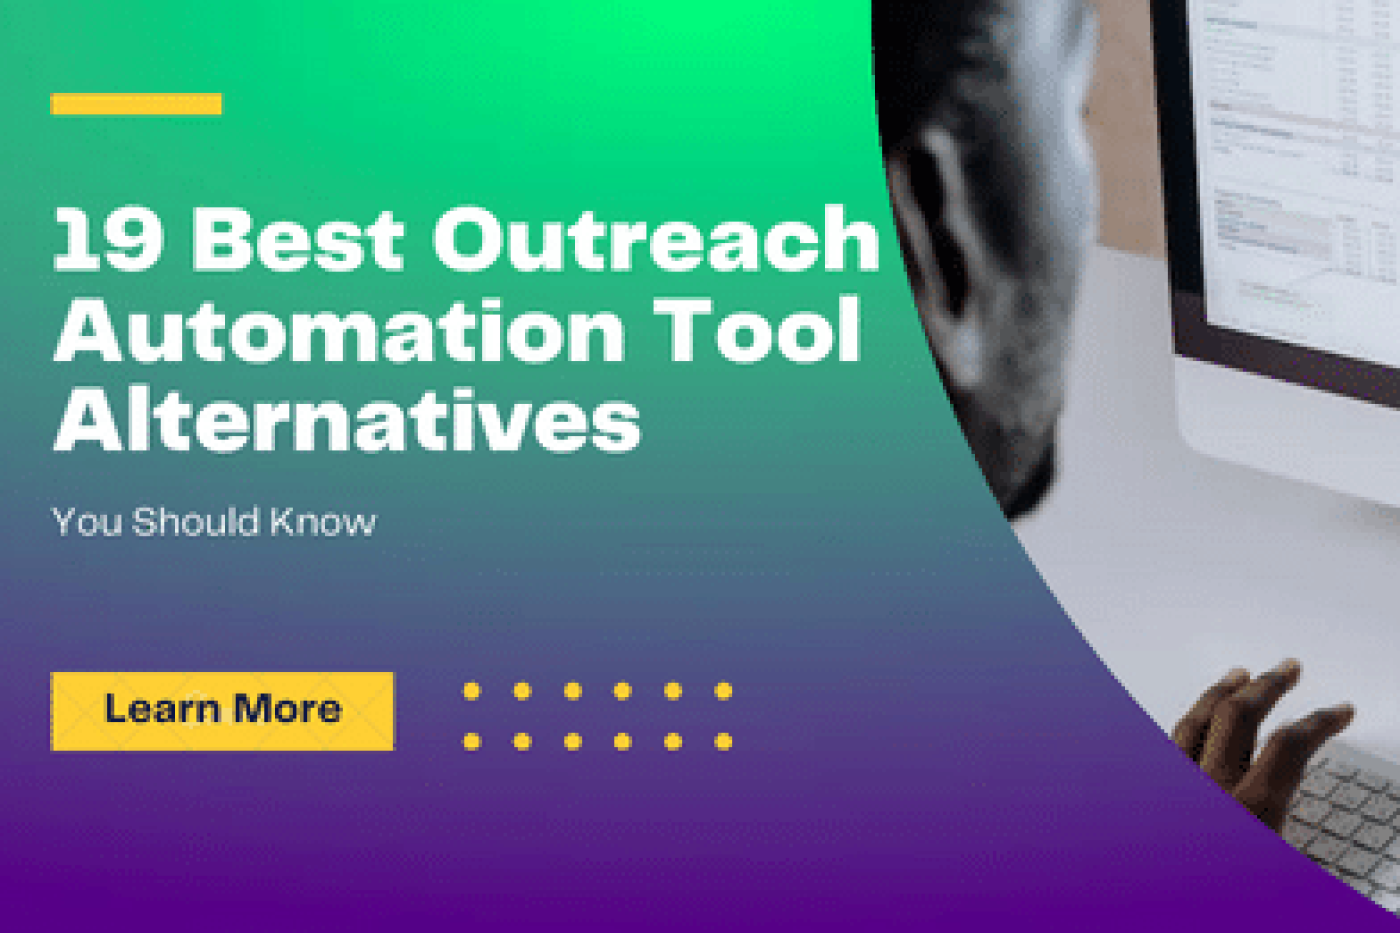 19 Best Outreach Automation Tools Alternatives